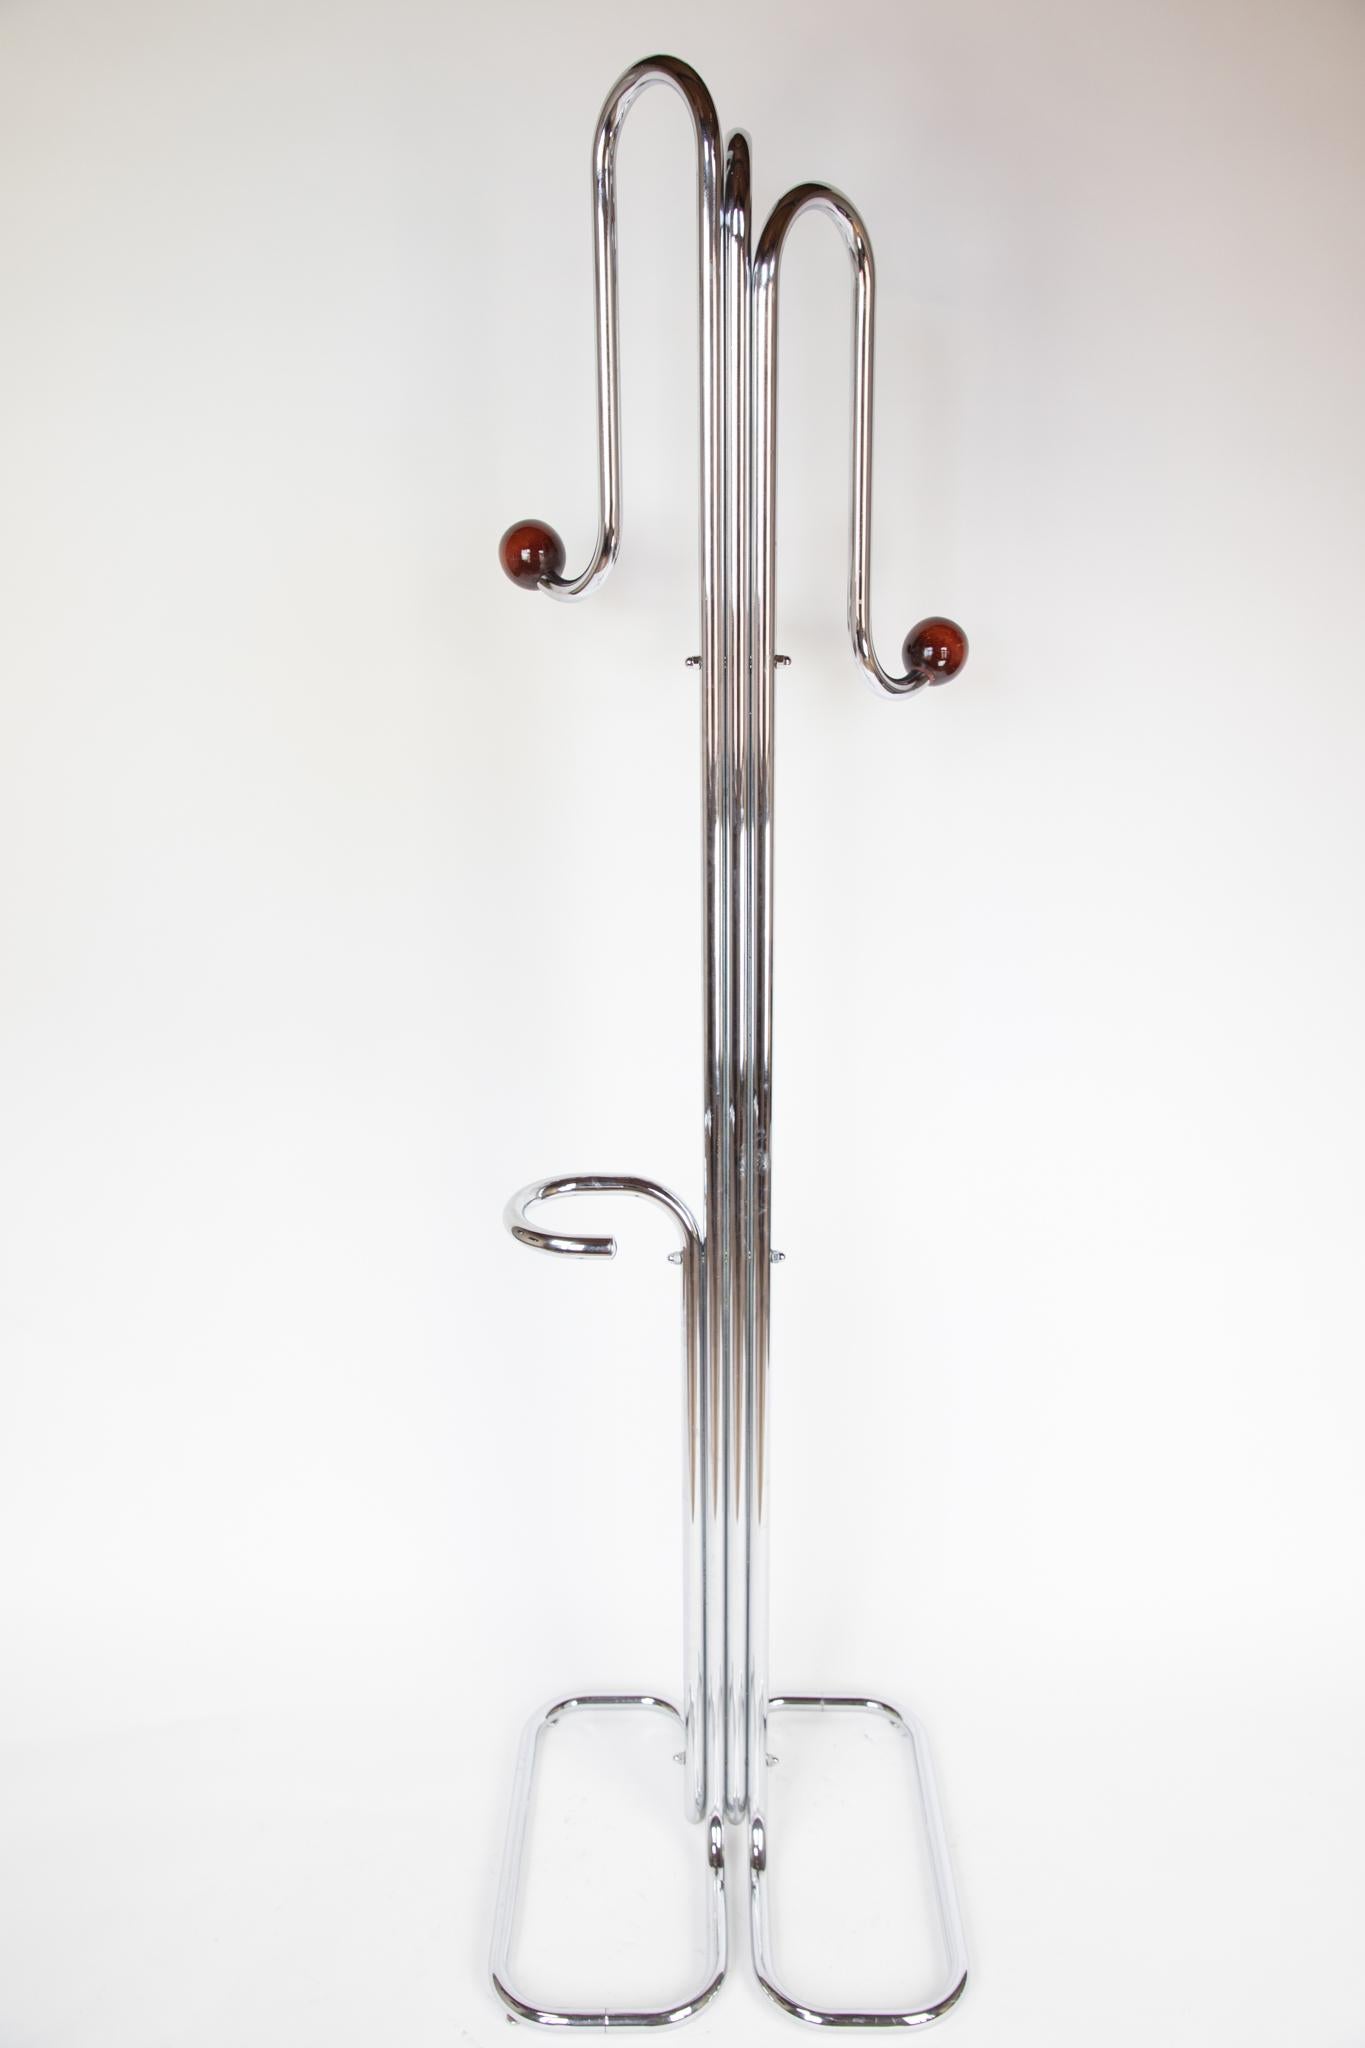 Space Age XL Coat Rack, Chrome Plated, Wooden Spheres, Italy, 1970s.

This fantastic coat rack is made of chrome-plated aluminium.The lively and interesting tubes run from the base of the coat rack to the top of it, where they finish with XL wooden